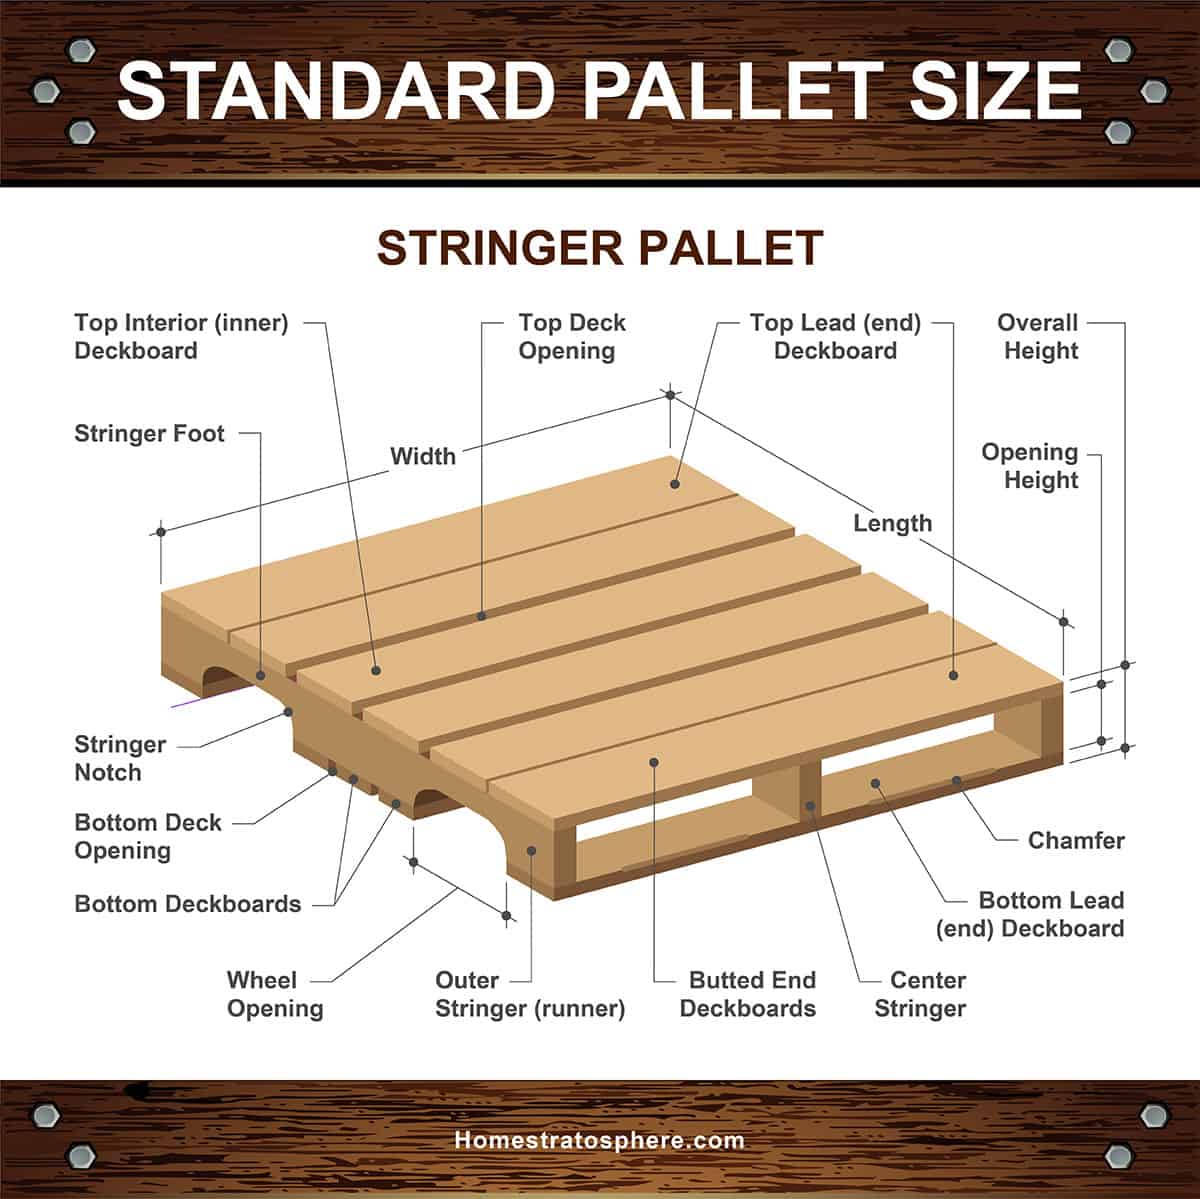 image detailing the size and configuration of stringer pallet